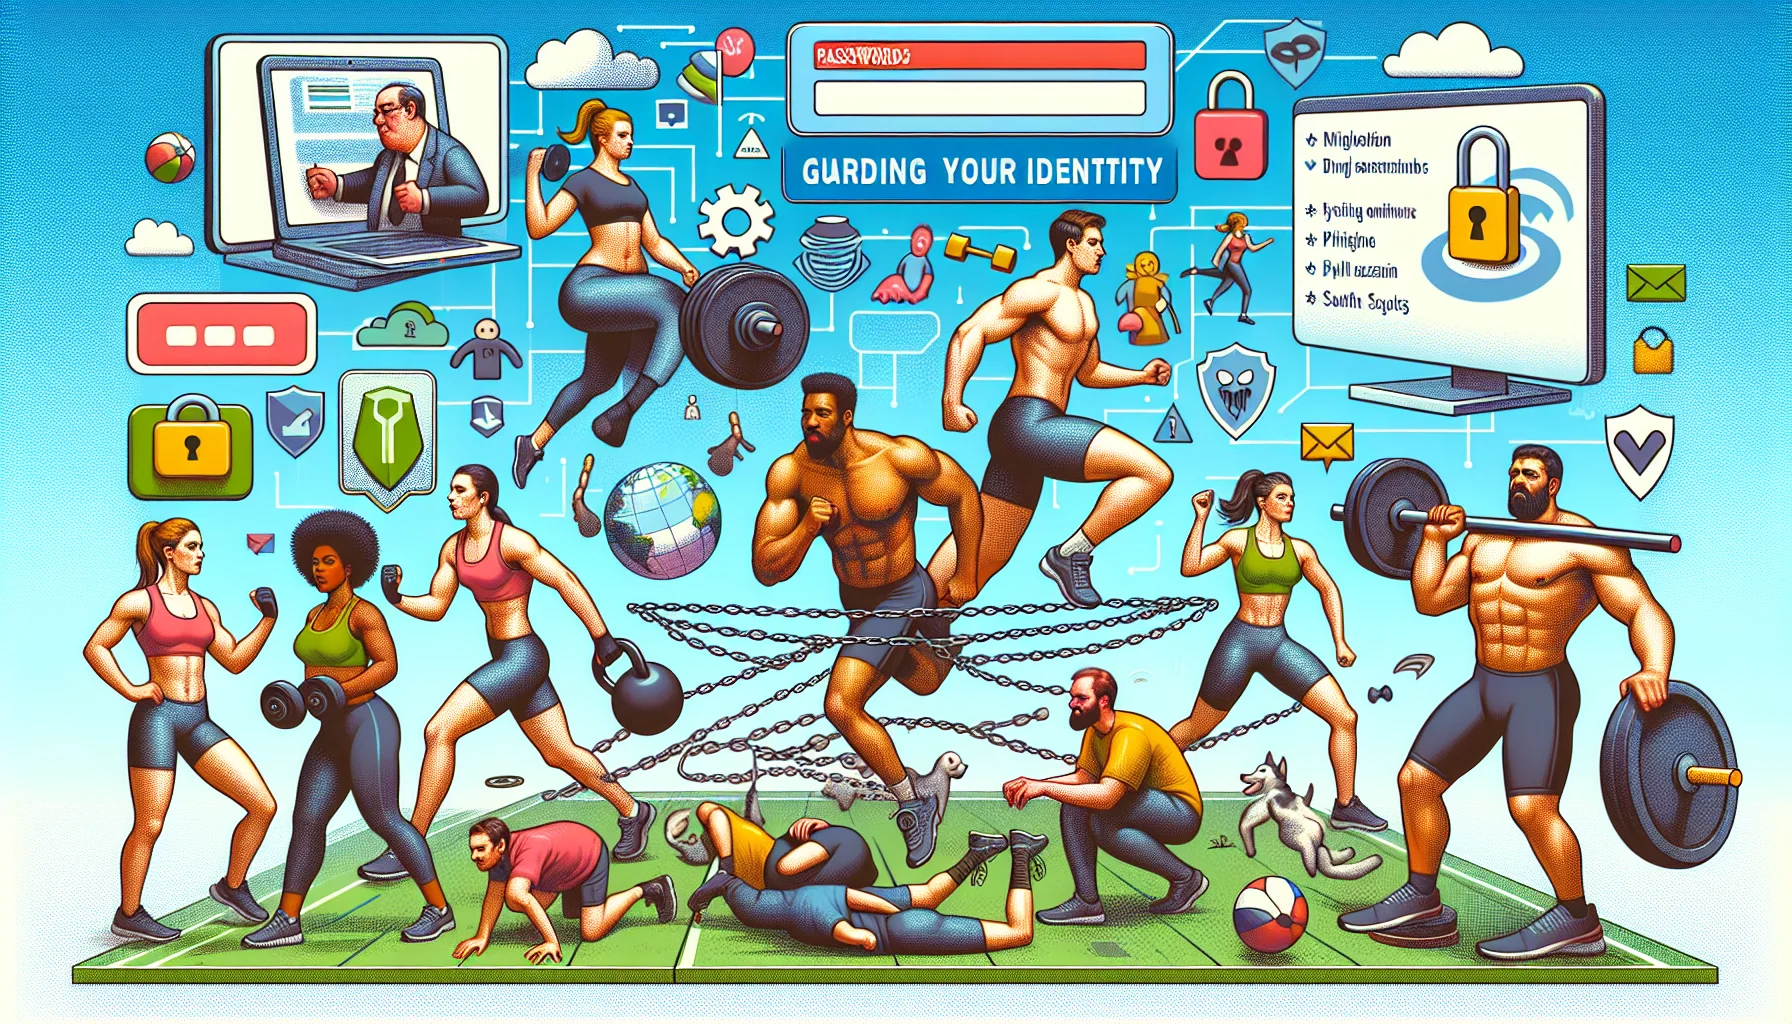 Create a creative and humorous image that symbolizes the idea of 'Guarding Your Identity: A Fitness Approach to Digital Safety'. Visualize a scene where diverse people of different genders and descents (e.g., Caucasian, Middle-Eastern, Hispanic, Black, South Asian) are engaging in various physical activities like running, lifting weights, and yoga. Incorporate elements that connote digital safety, like people carrying passwords as if they were weights, or dodging harmful online elements like phishing emails and viruses. Make sure the overall ambiance of the scene motivates people to stay active physically and digitally safe.